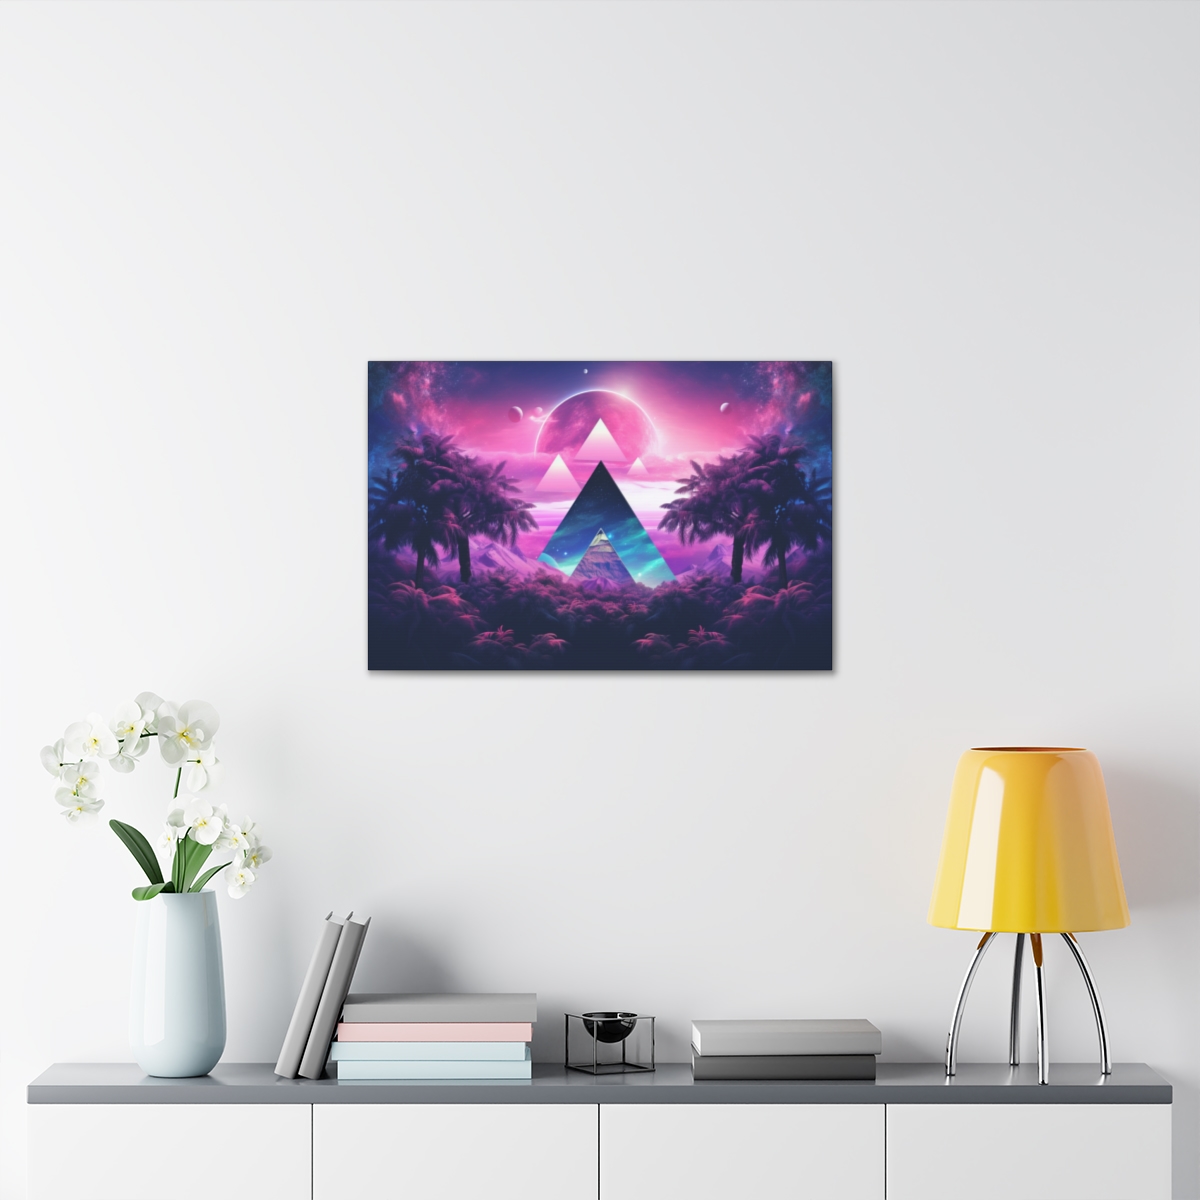 Retro Geometric Ethereal Art: Prism Of Truth